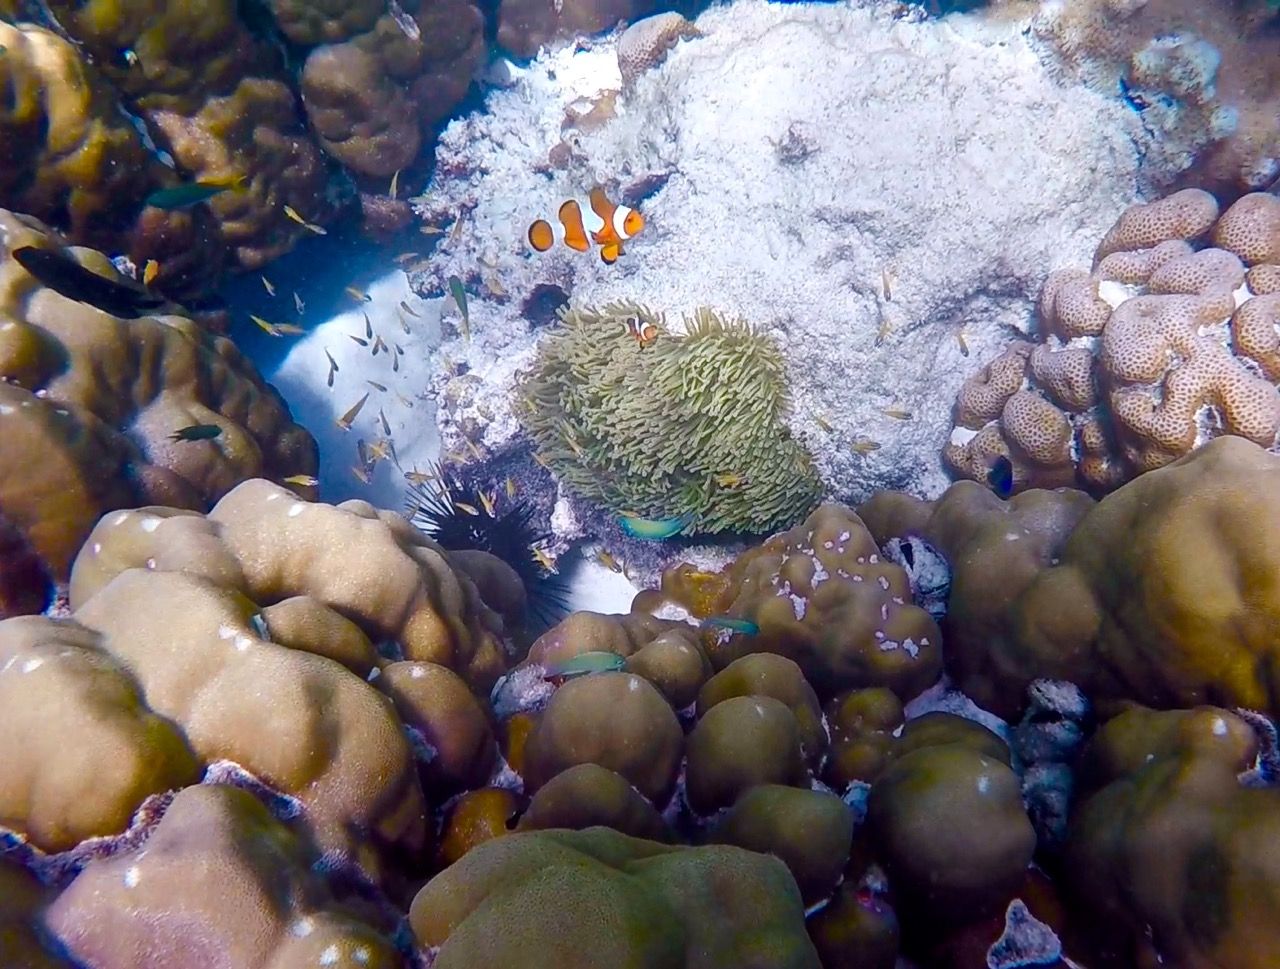 Clownfish hiding amongst the coral and urchins.